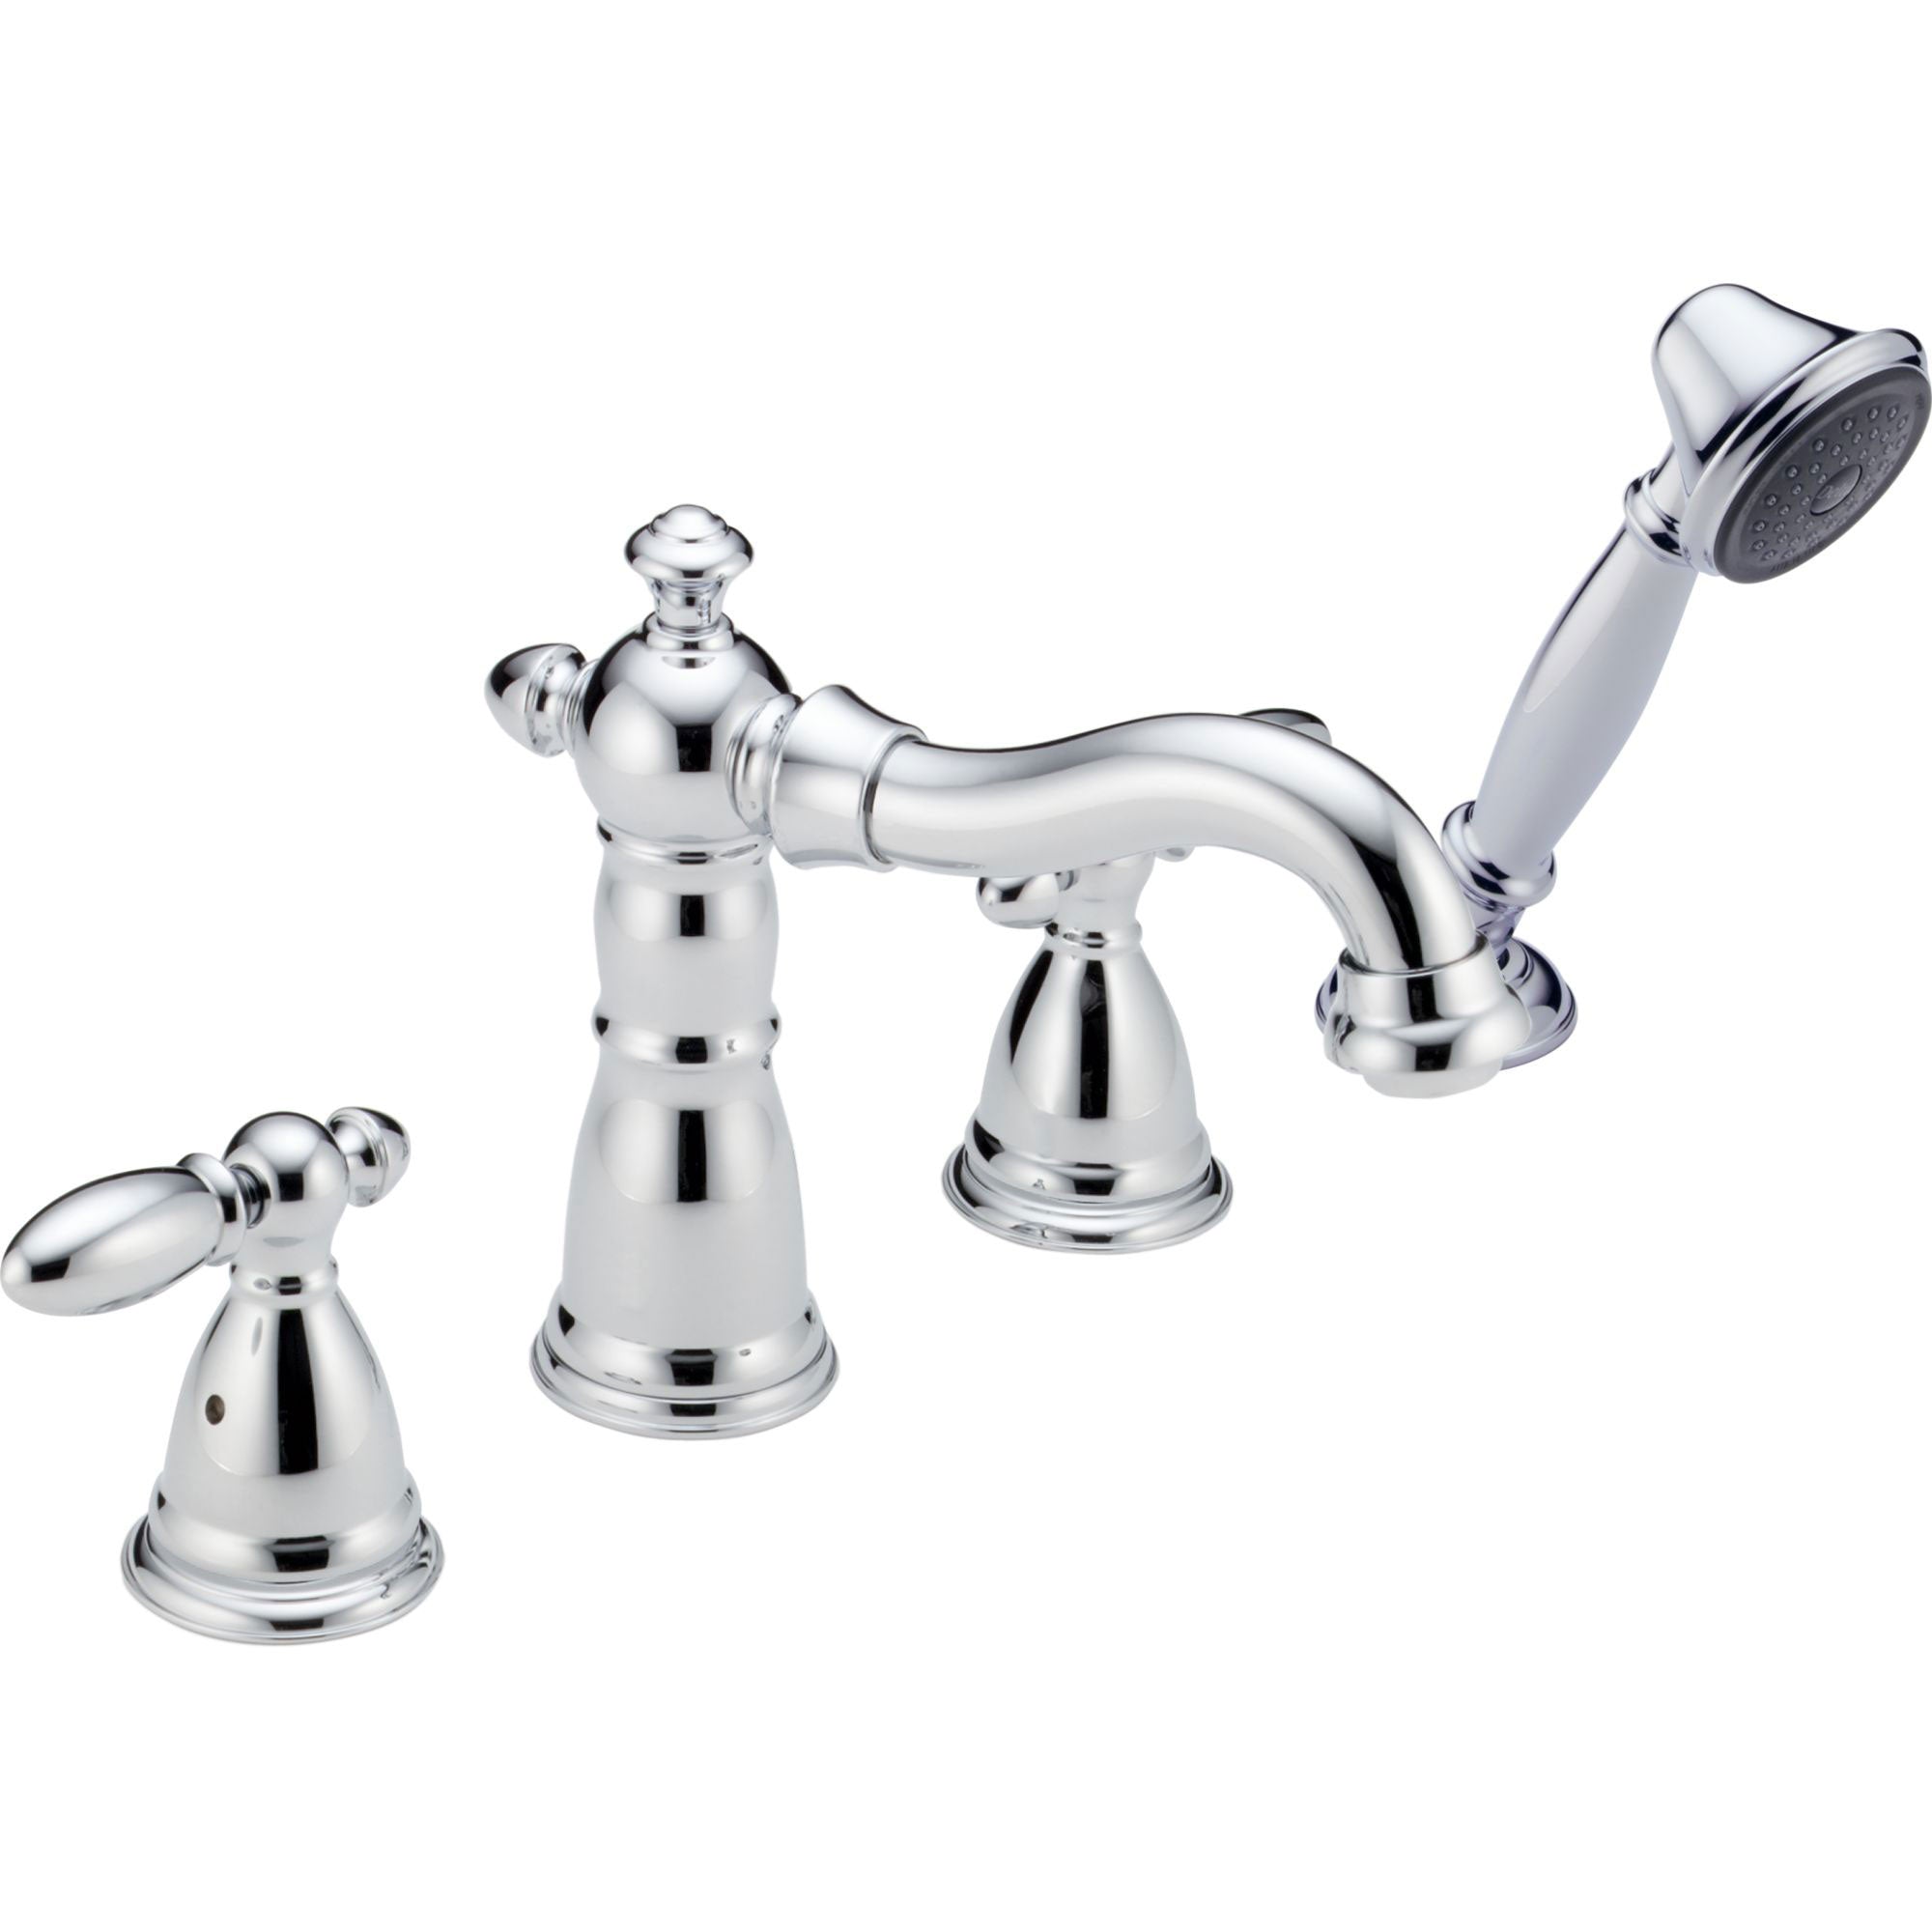 Delta Victorian Chrome Roman Tub Filler Faucet with Hand Shower Spray INCLUDES Valve and Lever Handles D1077V